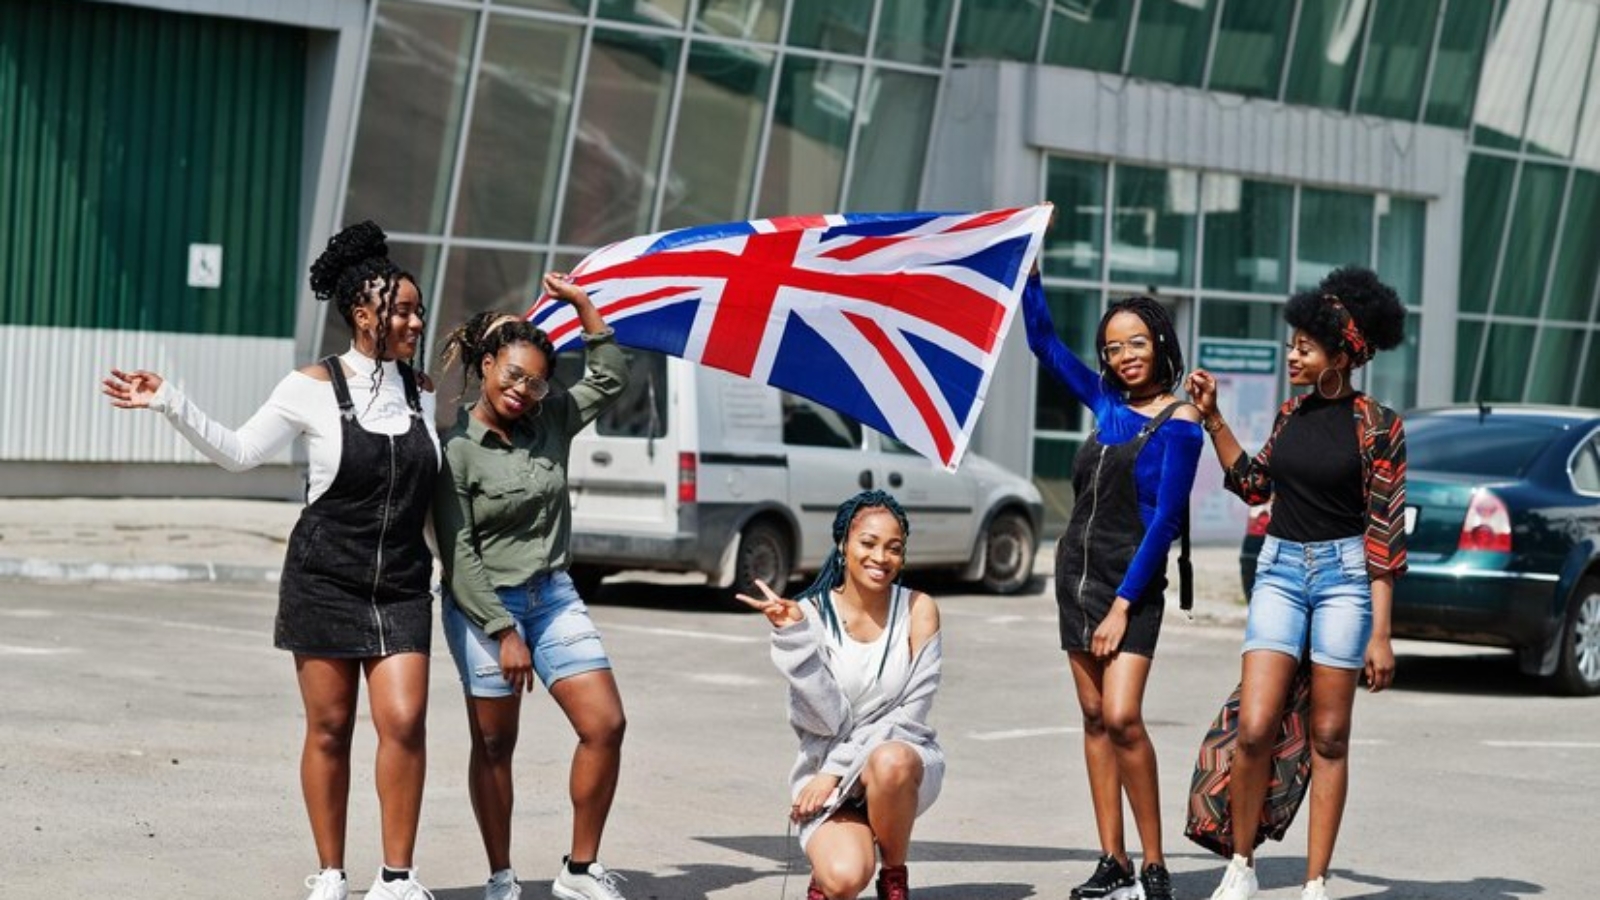 group-five-african-american-woman-walking-together-parking-with-great-britain-flag_627829-503